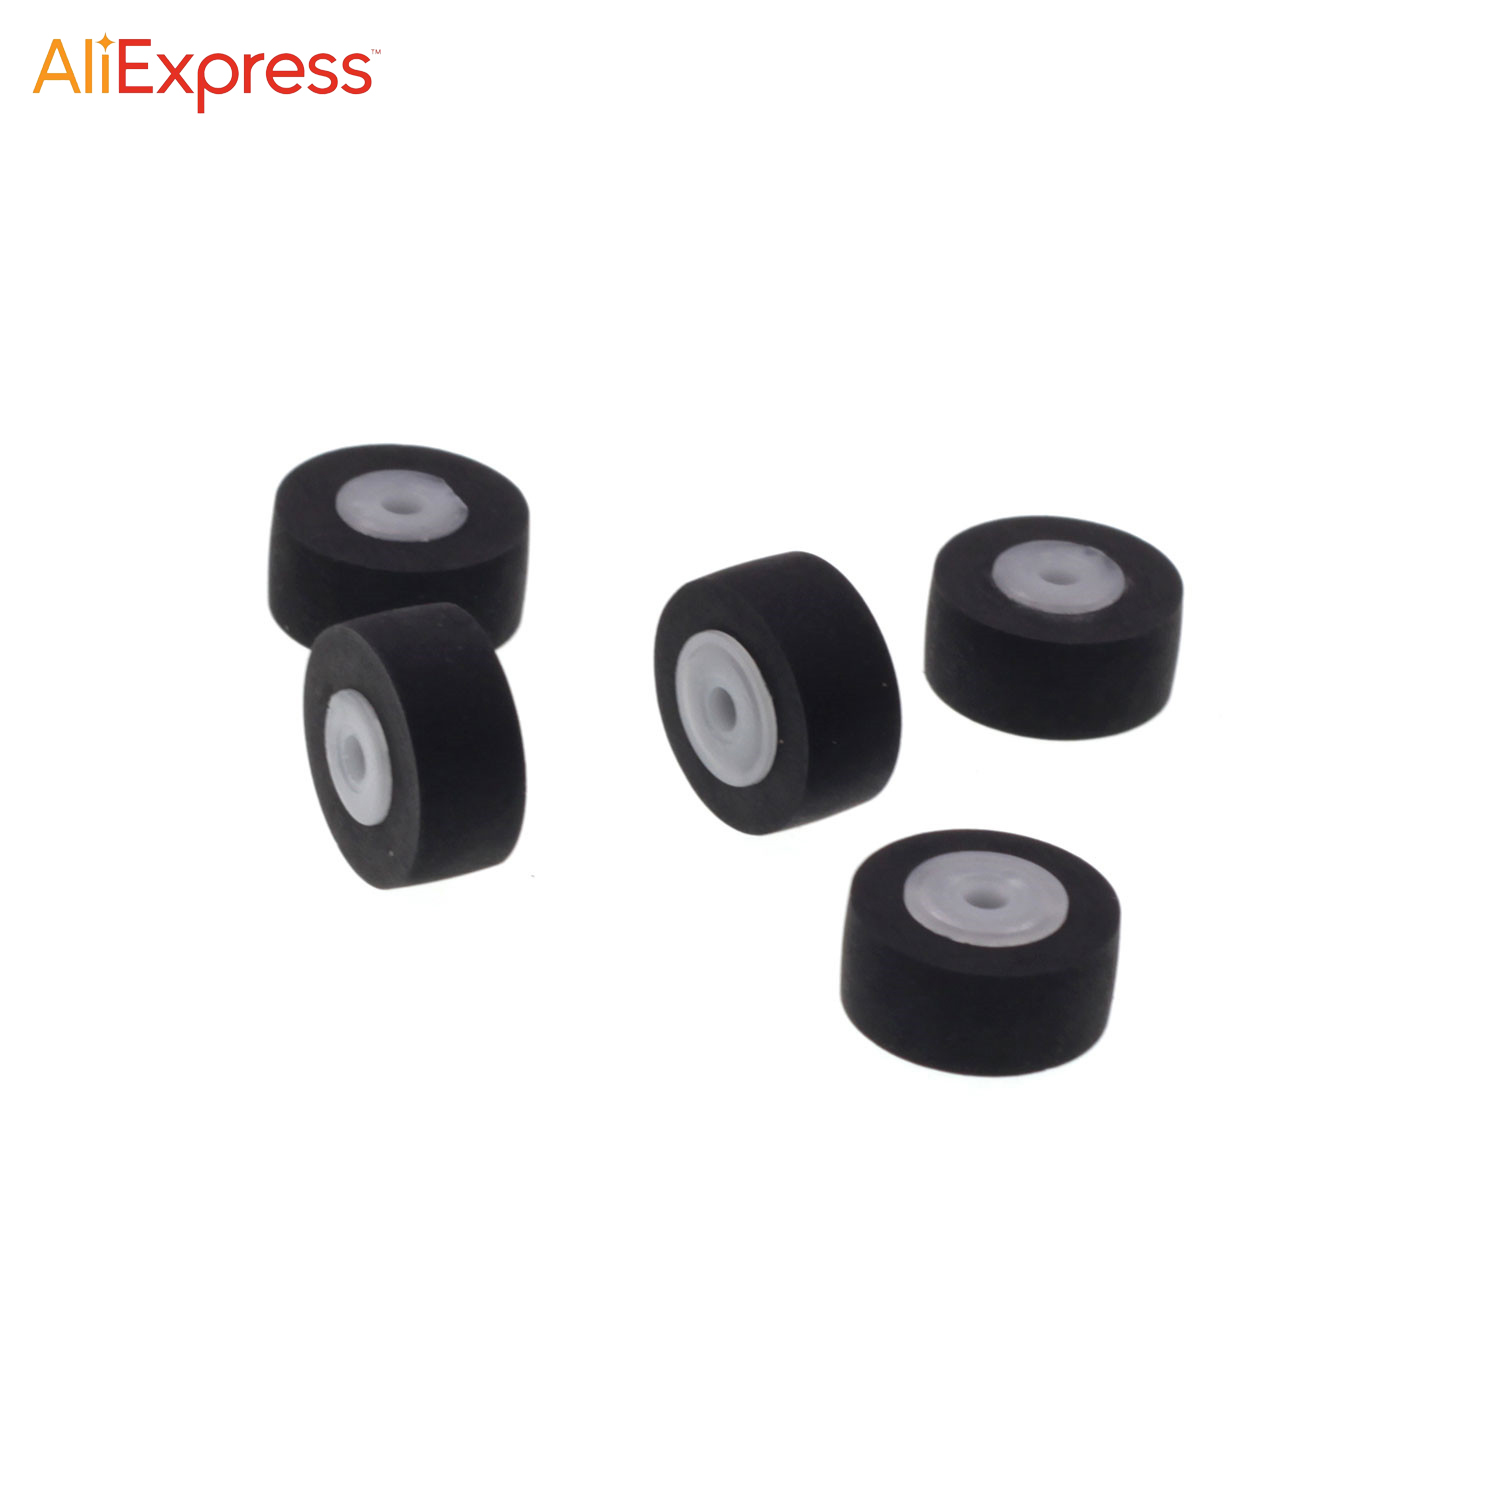 3x8x2.5mm deck audio pulley